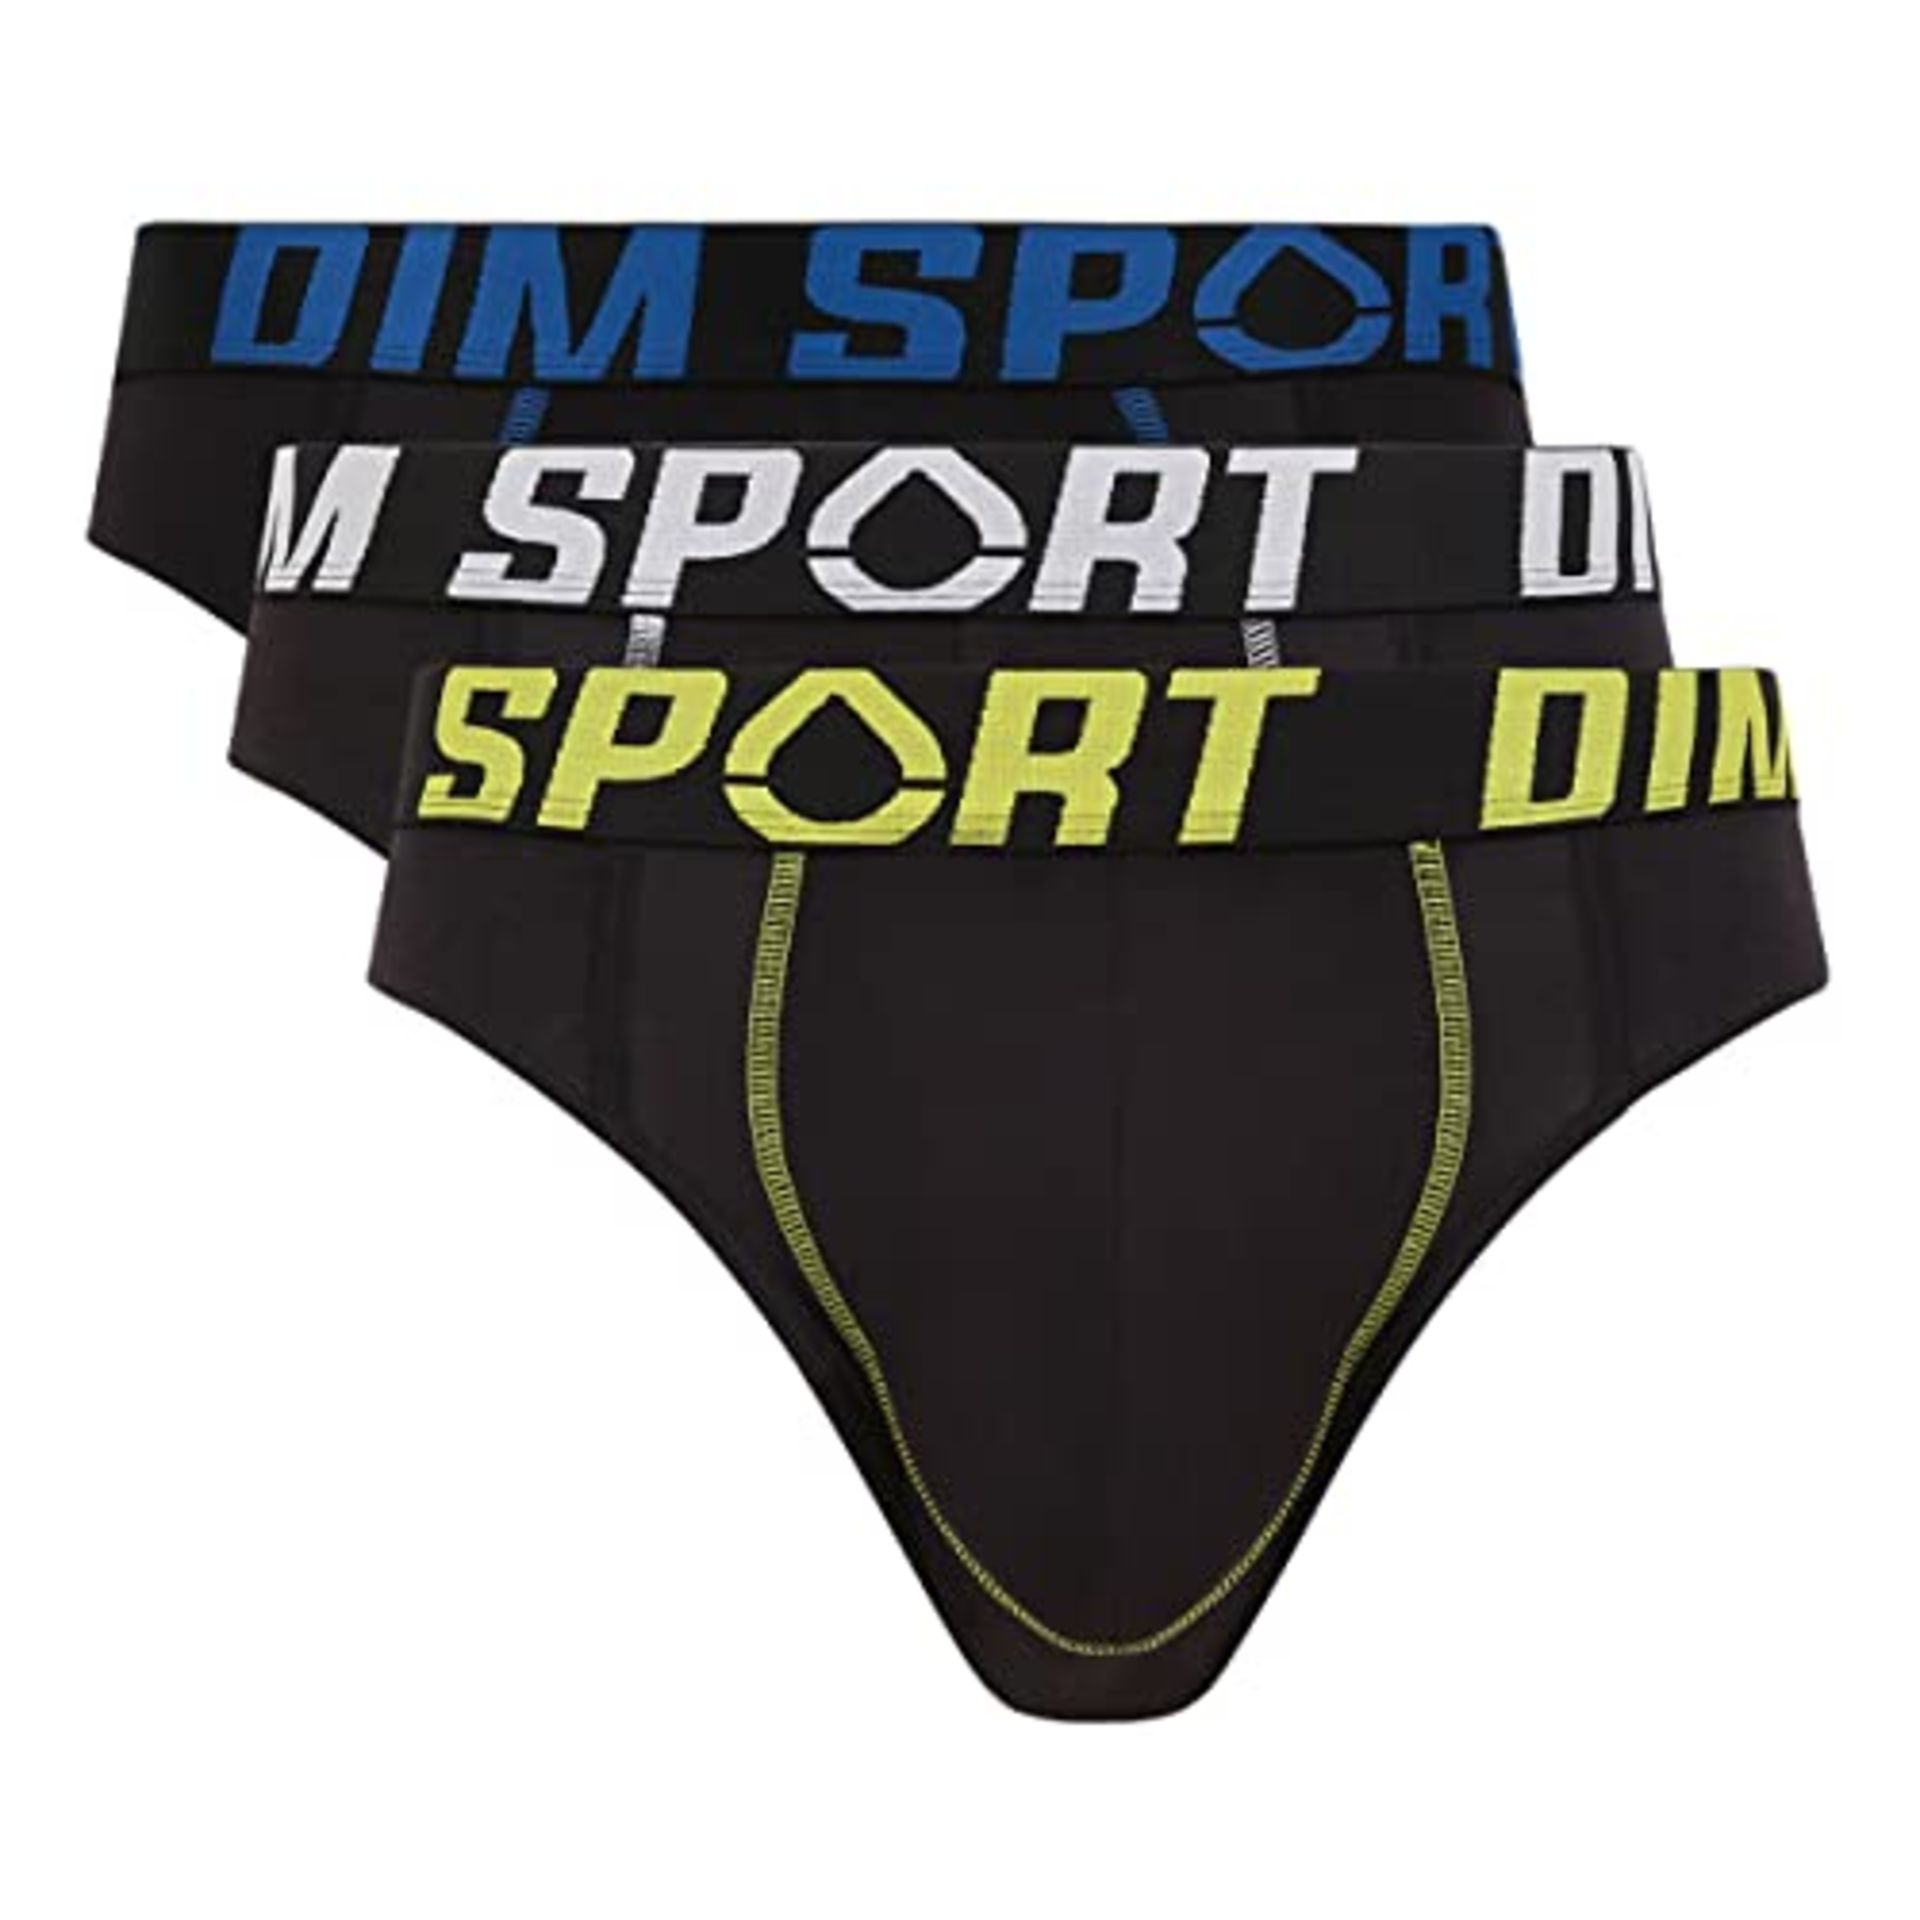 Men's Sport Slip with Cotton Stretch and Reinforced Support Thermo-Regulation x3 - Image 4 of 6